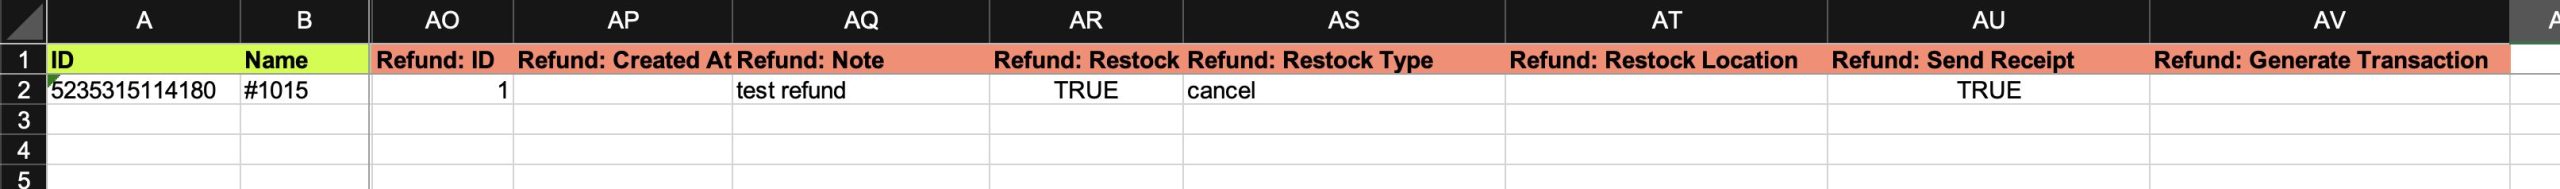 Filled in Refund columns for import